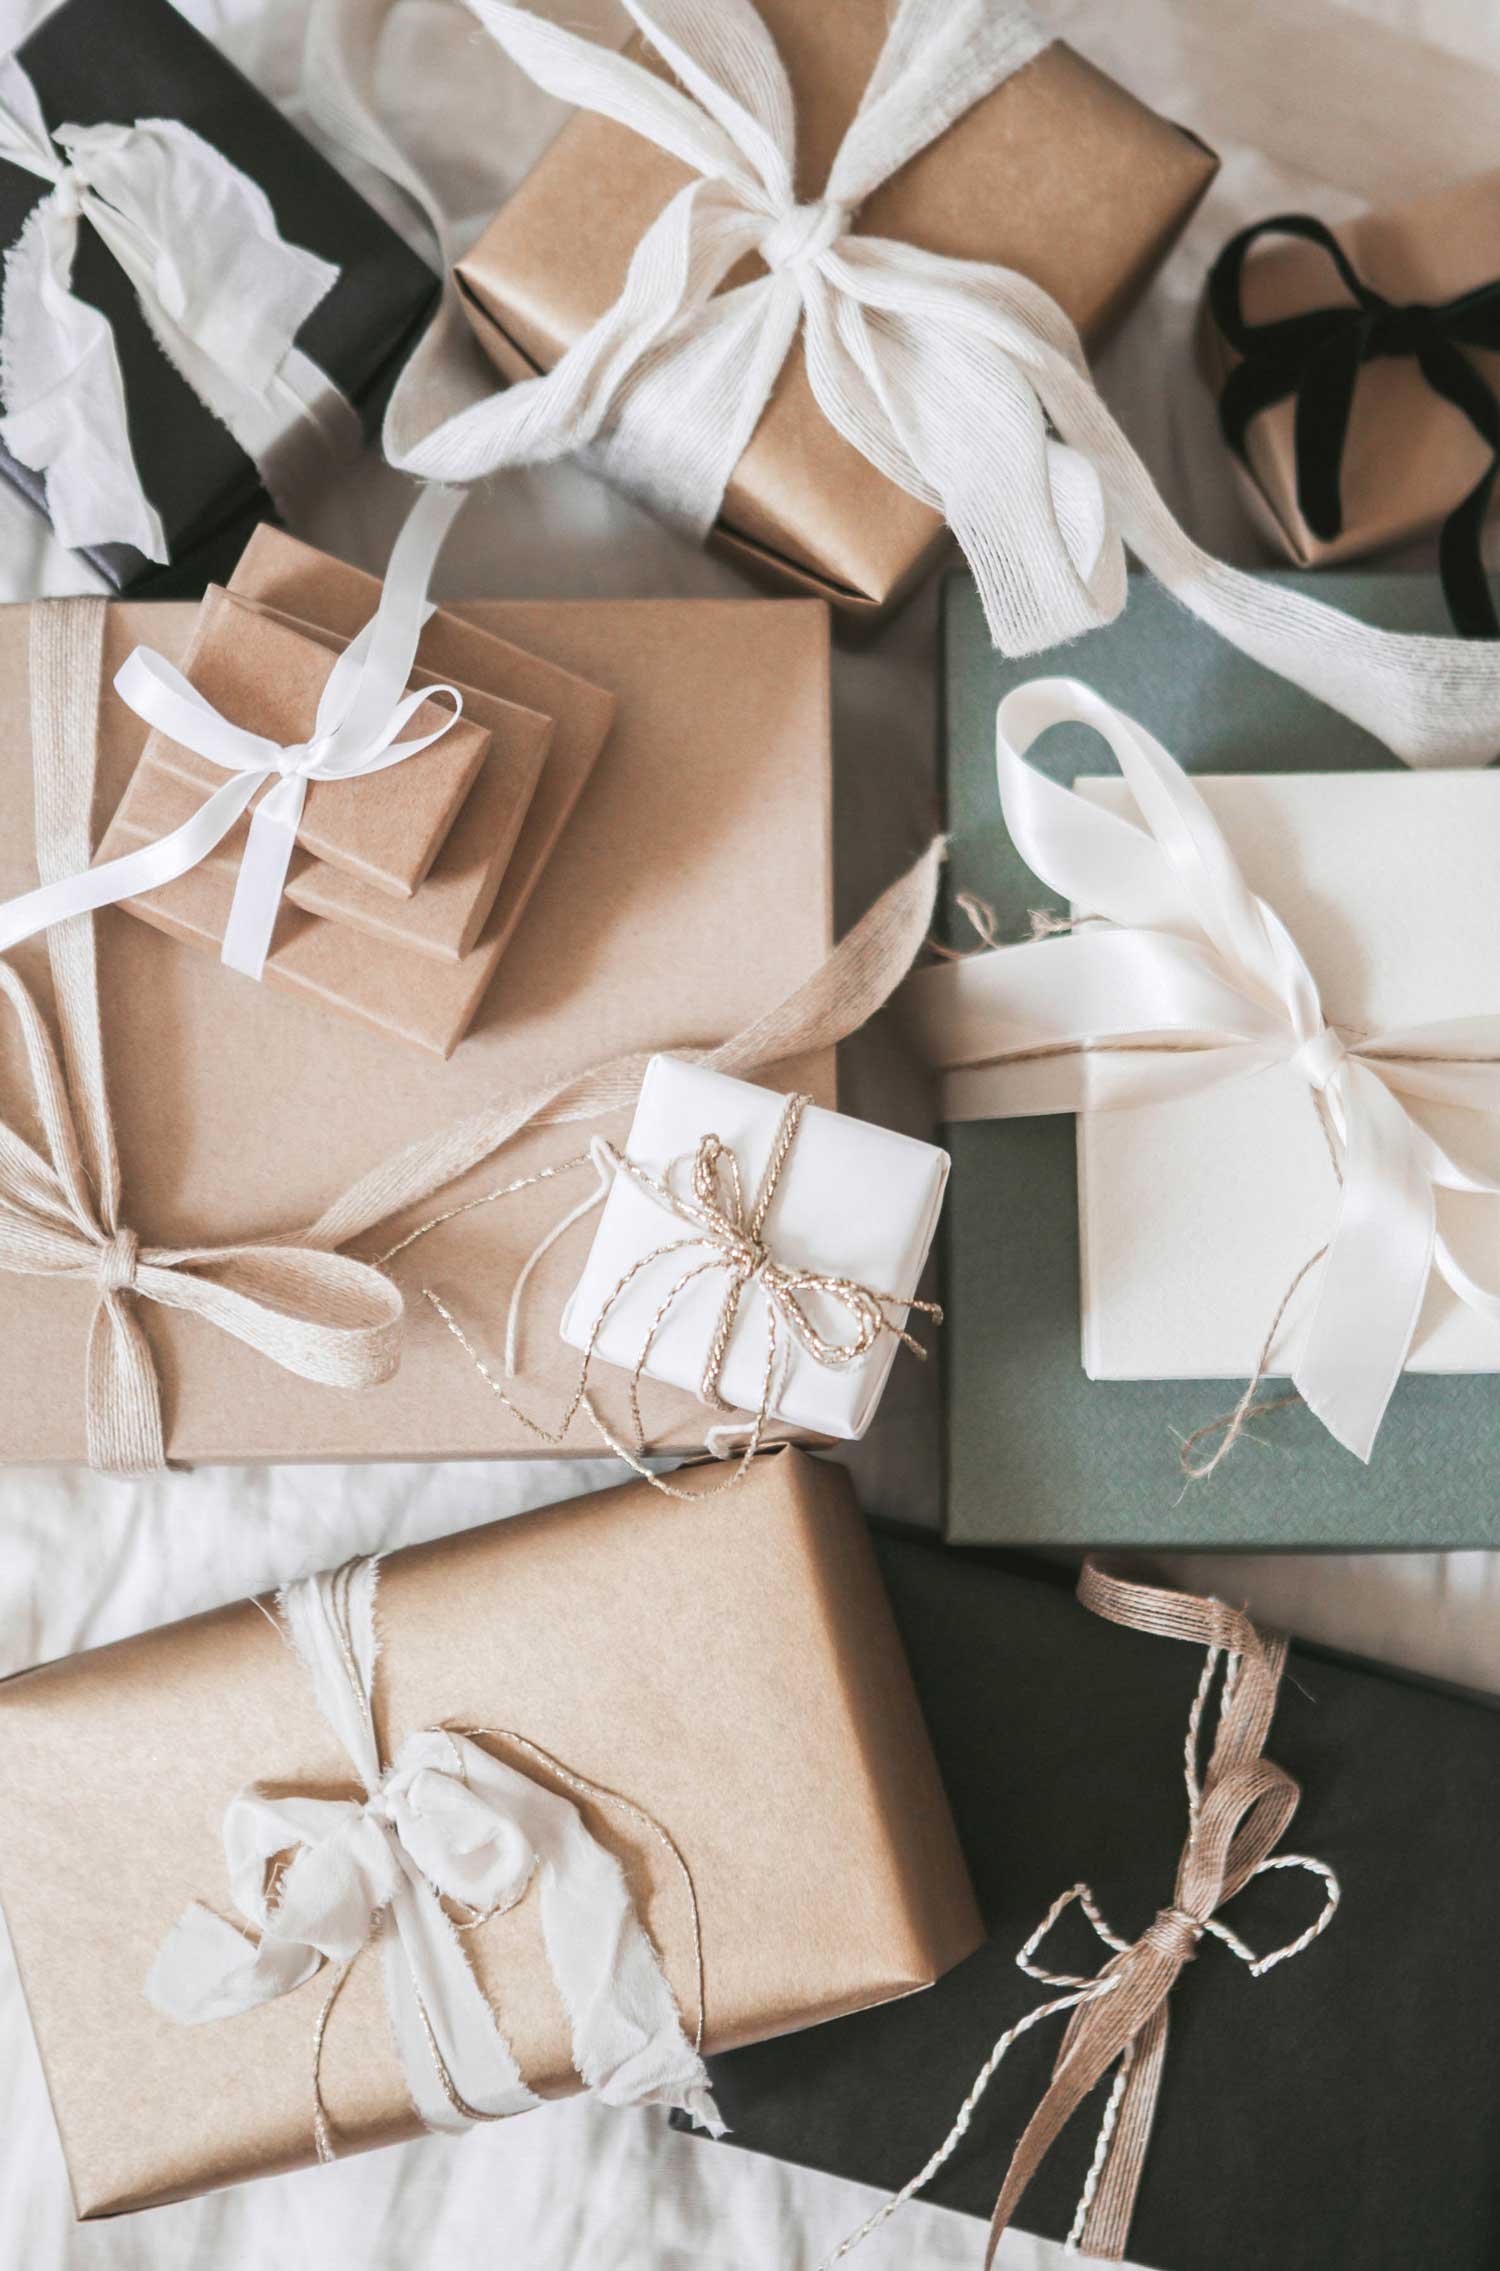 Clutter-Free Gifts That Are Sure To Shine This Holiday Season